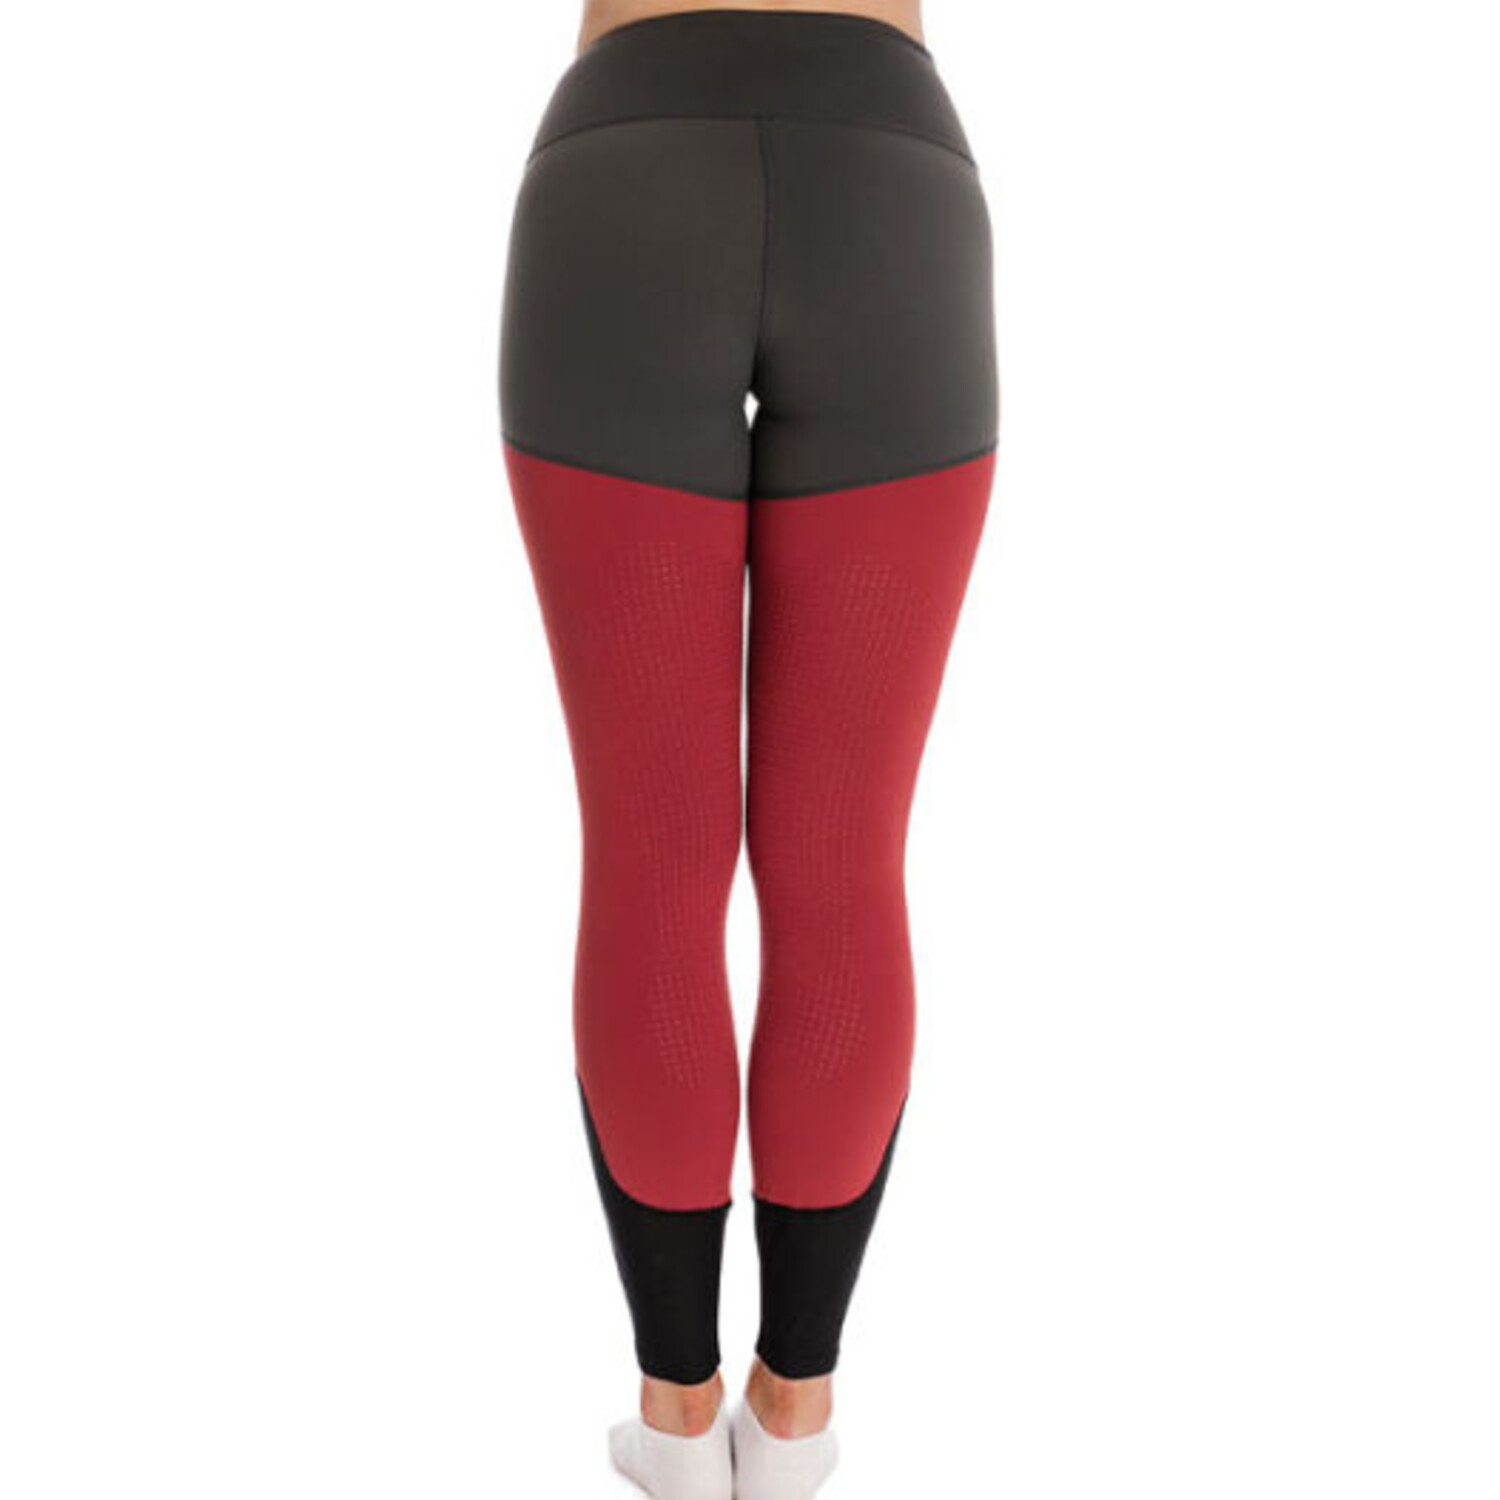 Buy China Wholesale Turner Equestrian Silicone Grip Horse Riding Leggings  Mirco Fleece Lining Tights Breeches For Added Warmth And Comfort & Horse  Riding Leggings $11.74